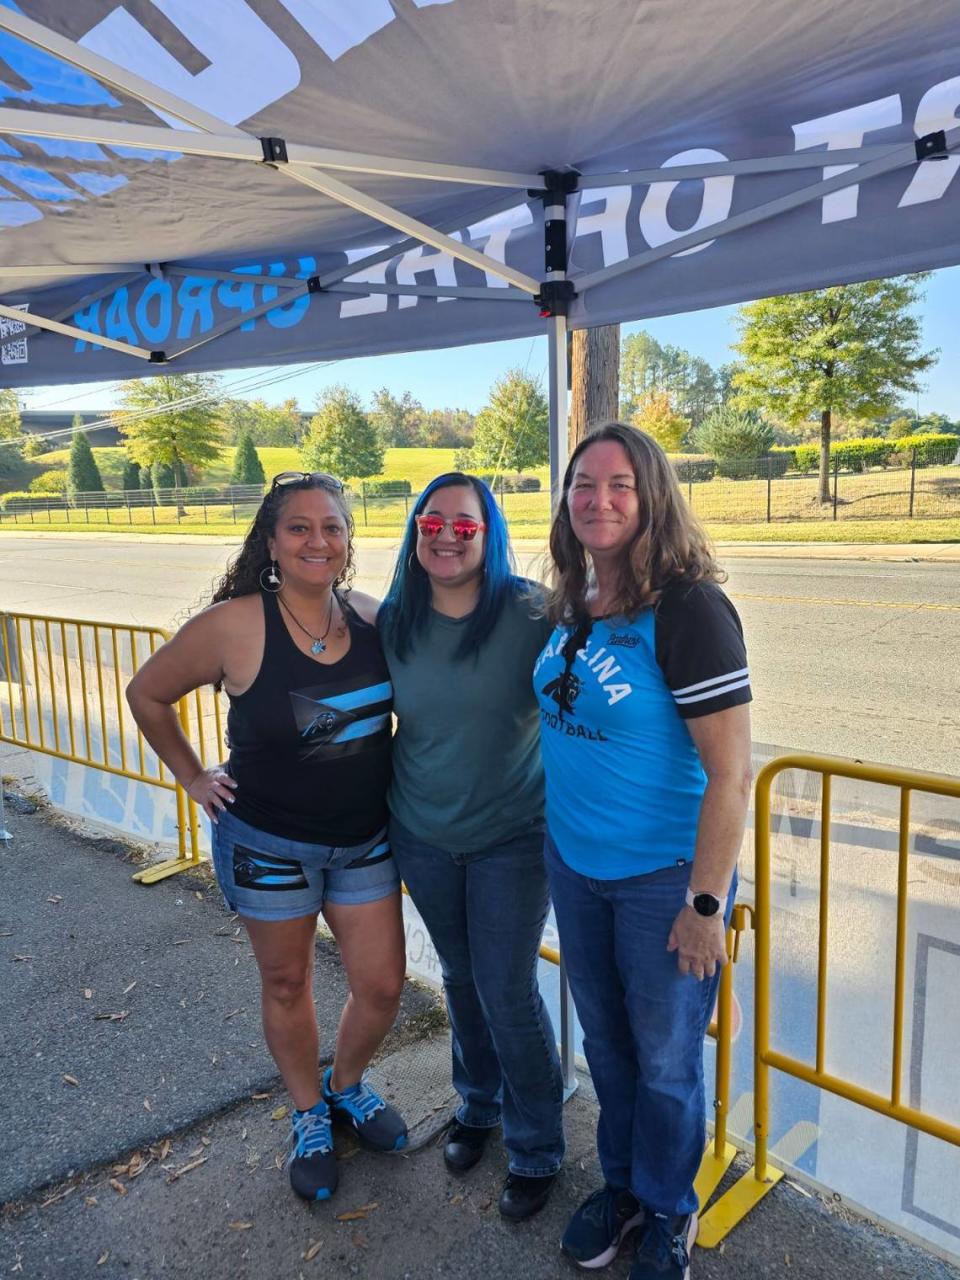 Erika Moulton, left, and friends pose for a photo at a Roaring Riot tailgate before a Carolina Panthers game. Moulton wears clothing with a flag stitched on — one that merges the design of the Puerto Rican flag with the colors and logo of the Panthers team logo: “I wear my Hispanic pride at every game,” she said. Courtesy of Erika Moulton